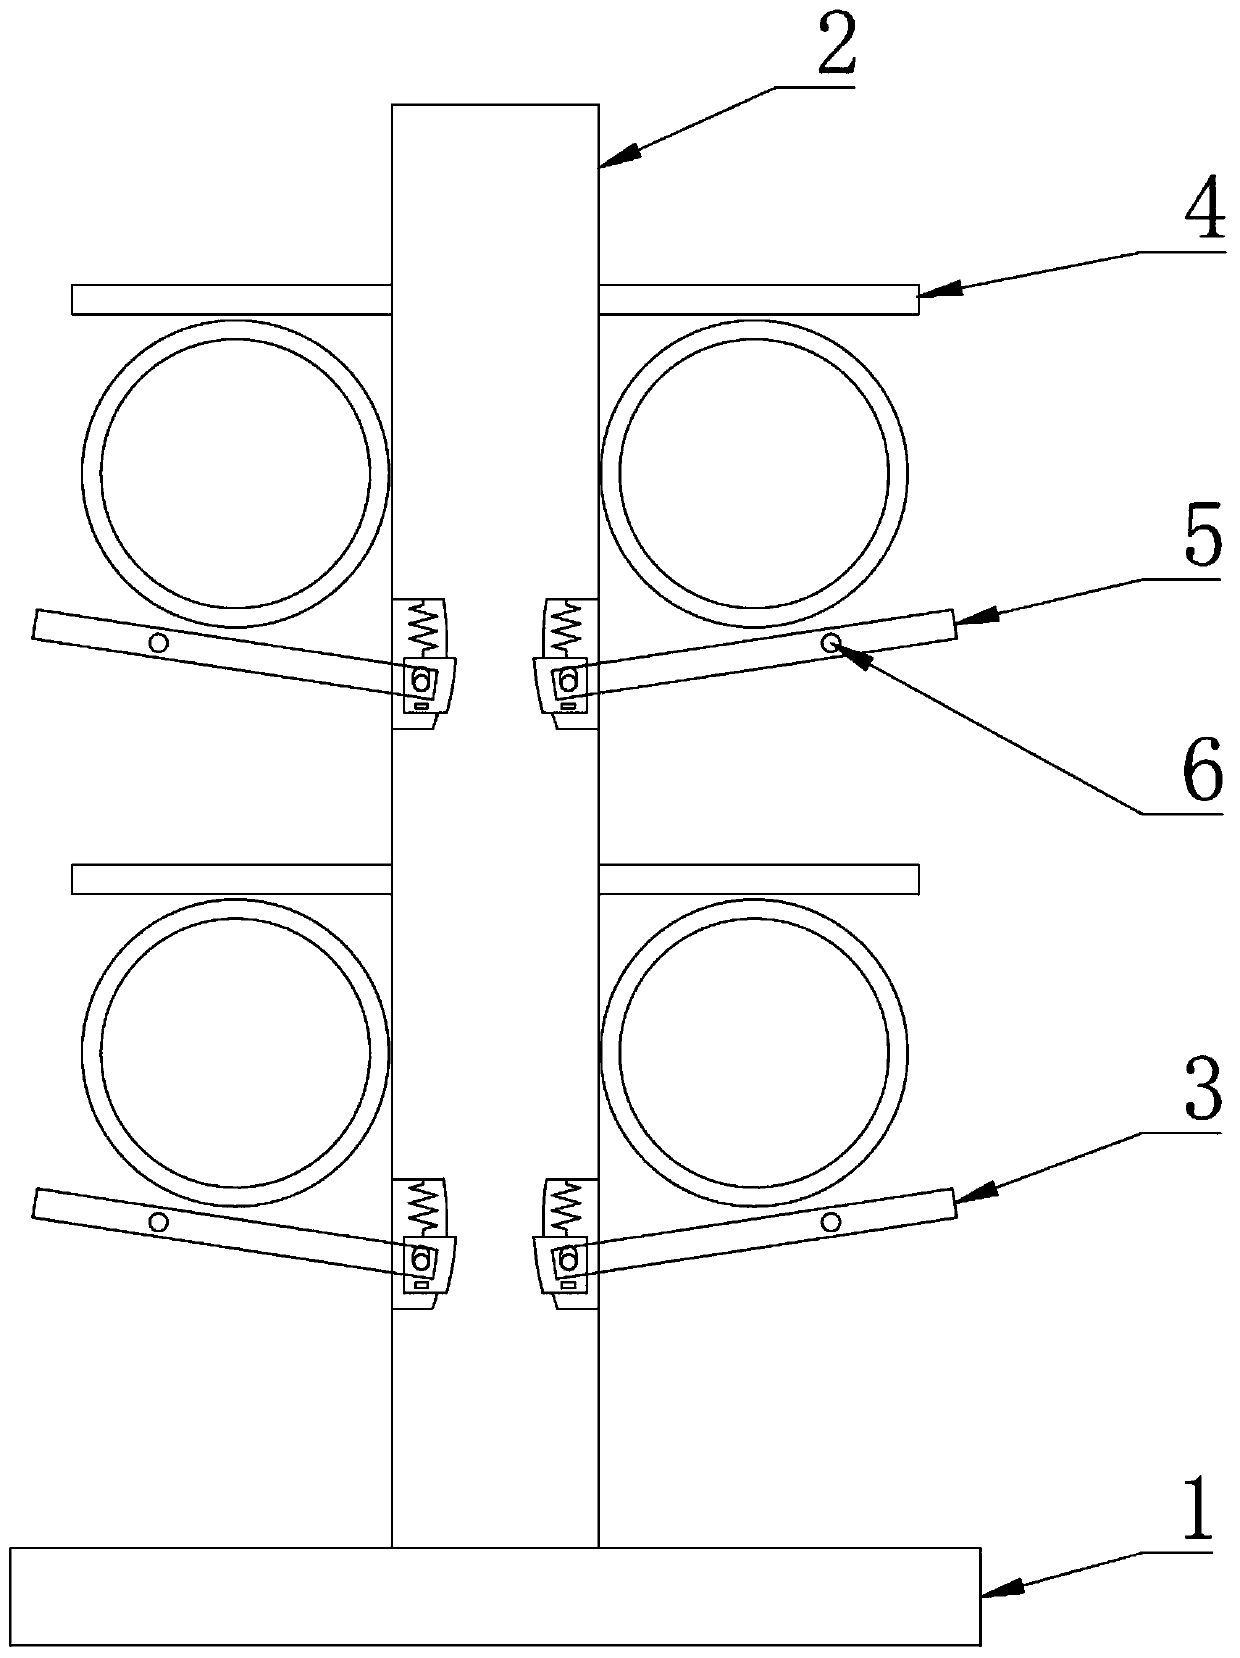 A placement rack for automobile steering wheel production